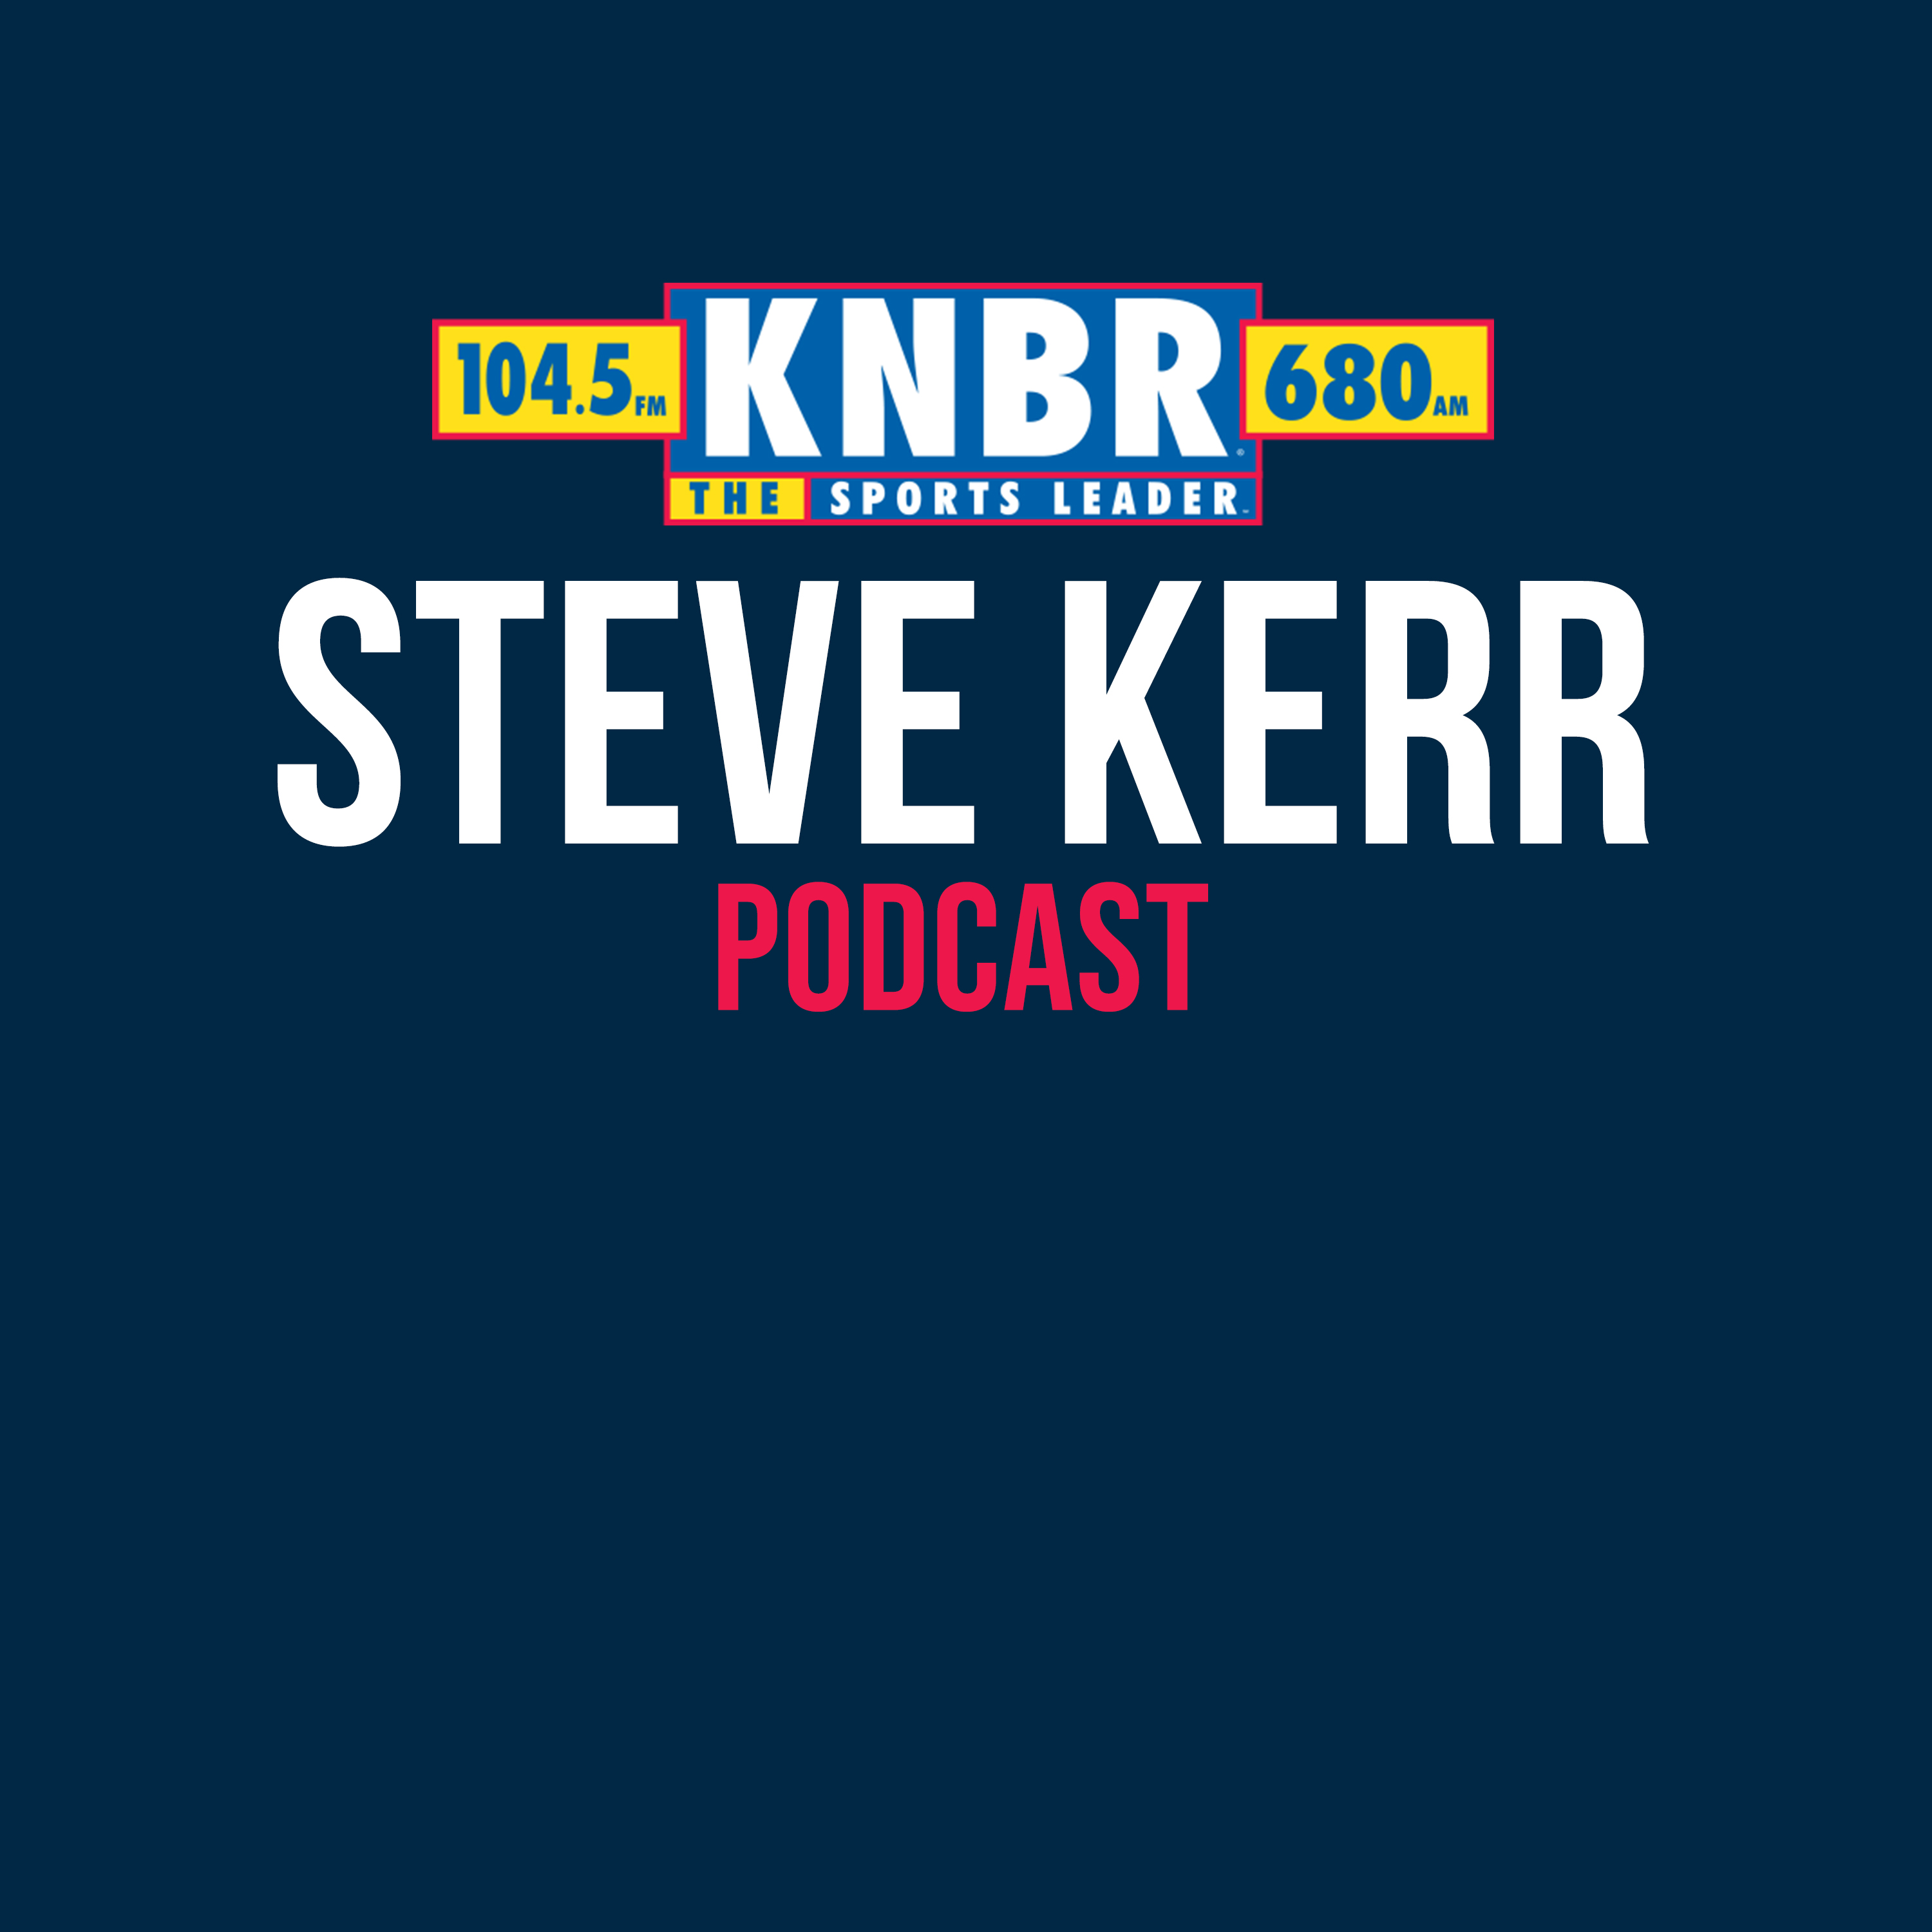 1-11 Steve Kerr joins Tolbert & Copes and takes responsibility for the Warriors loss to the Suns but feels encouraged